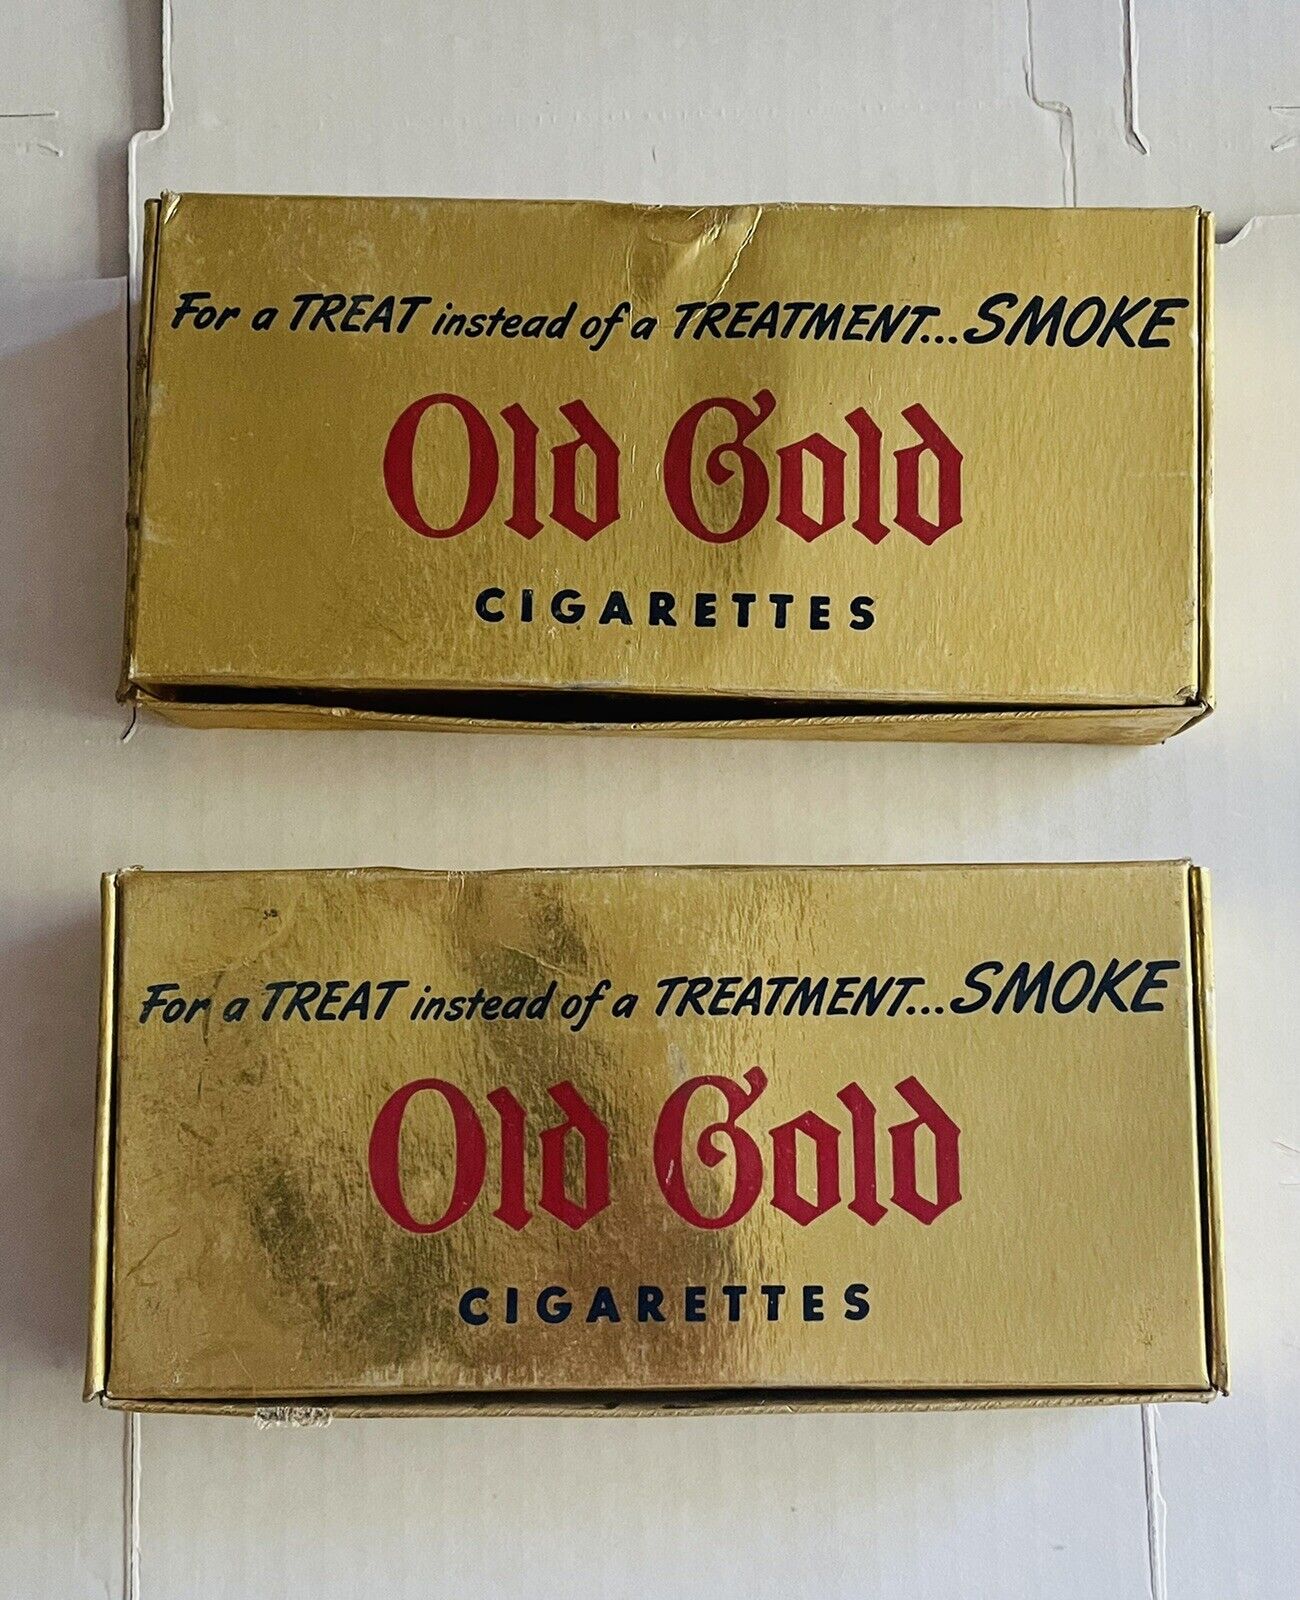 Vintage 2 Old Gold Cigarettes Paper Box, 1 Empty, 1 W/ Matches & Empty Tin Can